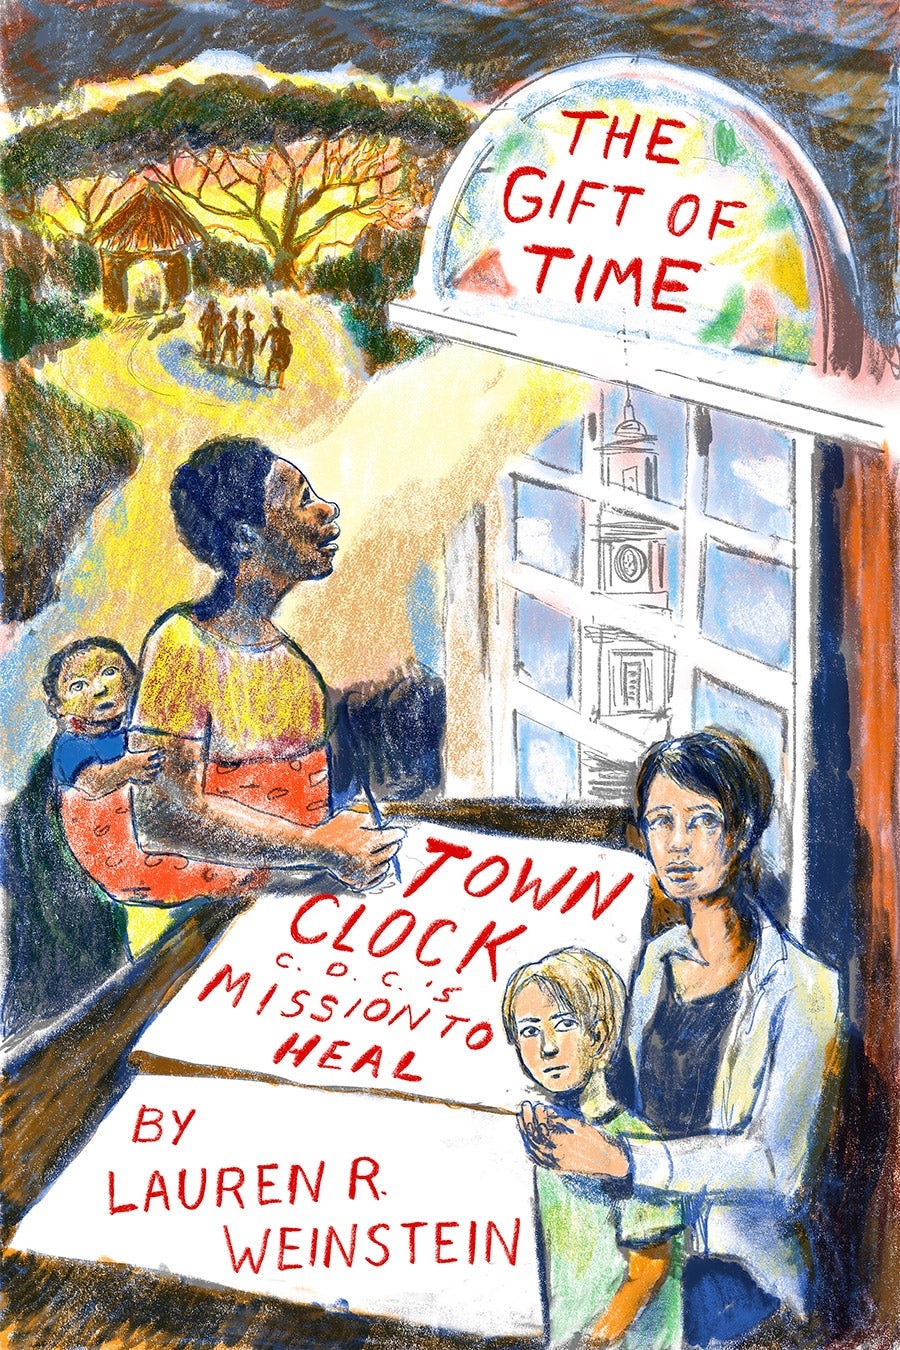 Cover image. Two woman and their children, and the title "The Gift of Time."